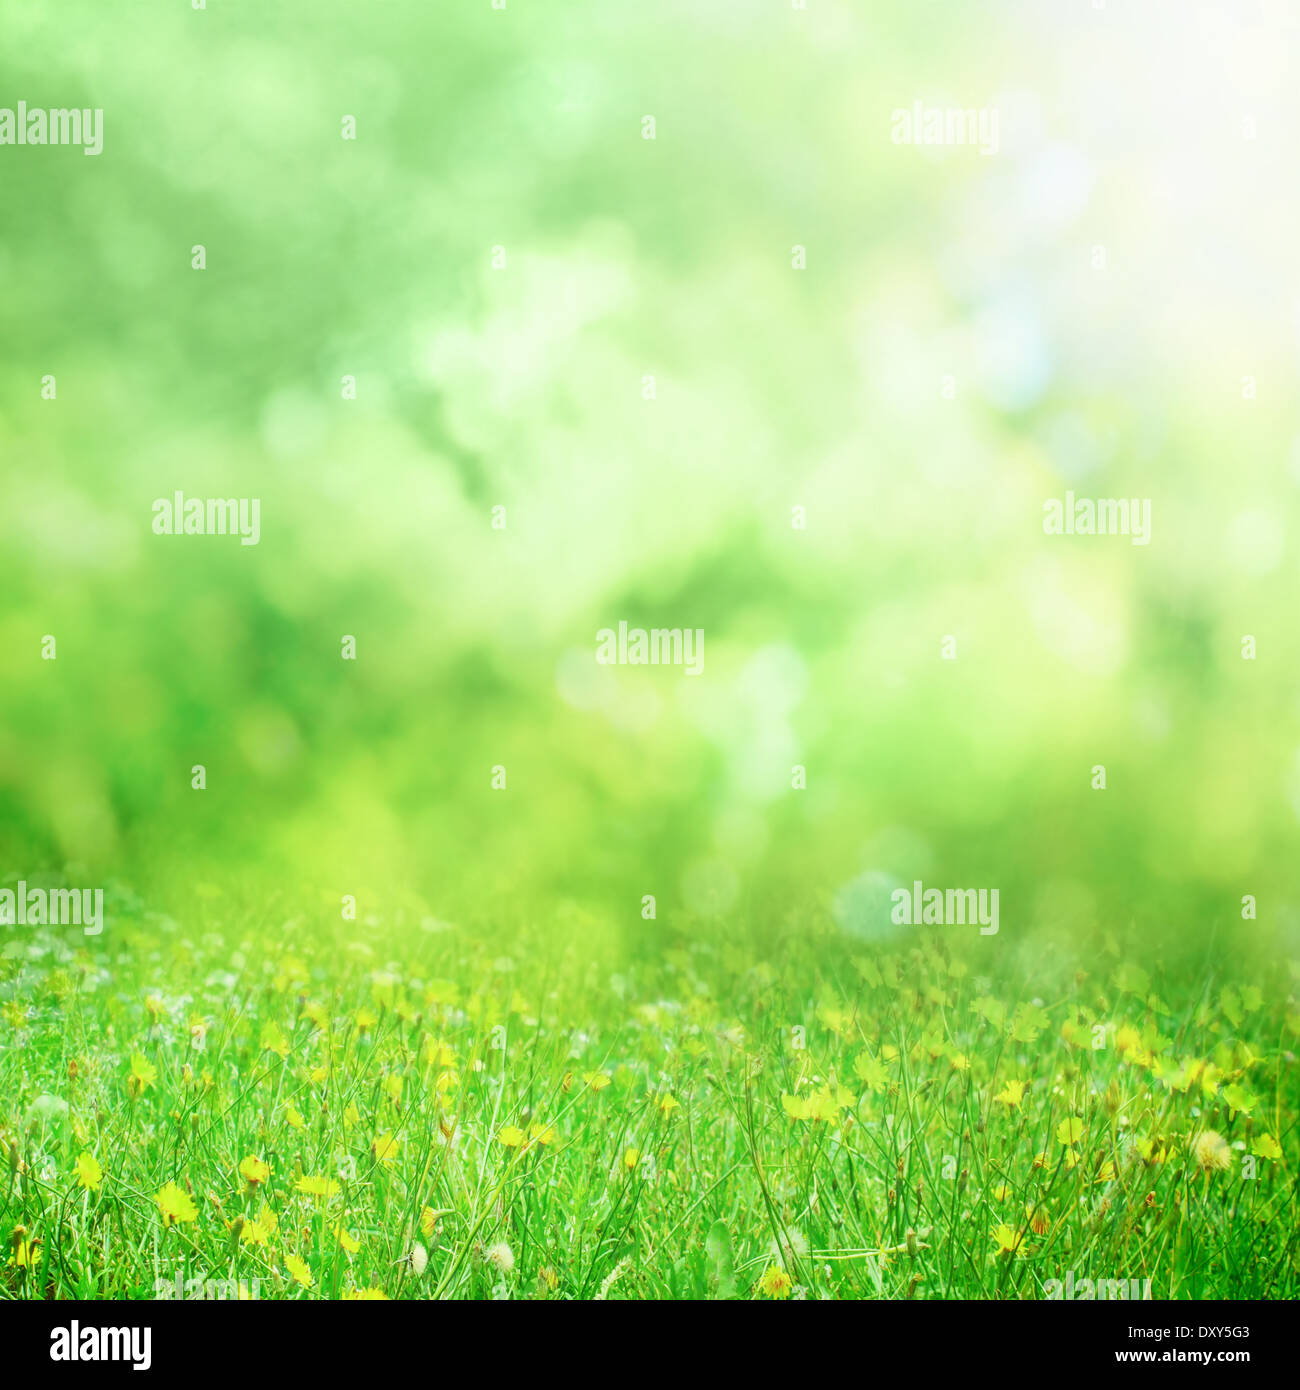 Sunny flower park meadow background Banque D'Images